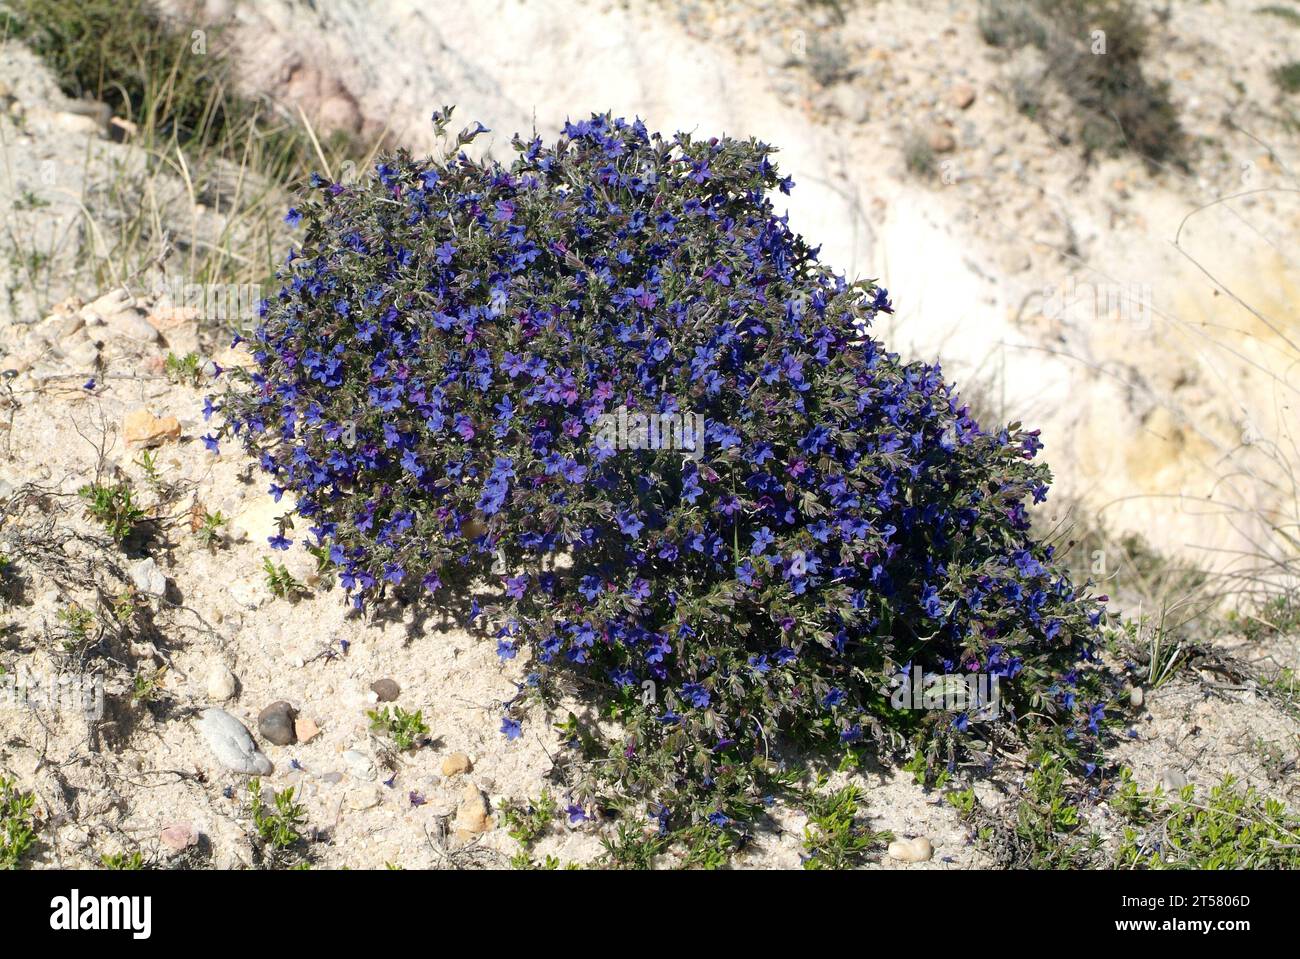 Shrubby gromwell (Lithospermum fruticosum or Lithodora fruticosa) is a small shrub (formerly medicinal) native to Spain, Portugal, France and Morocco. Stock Photo